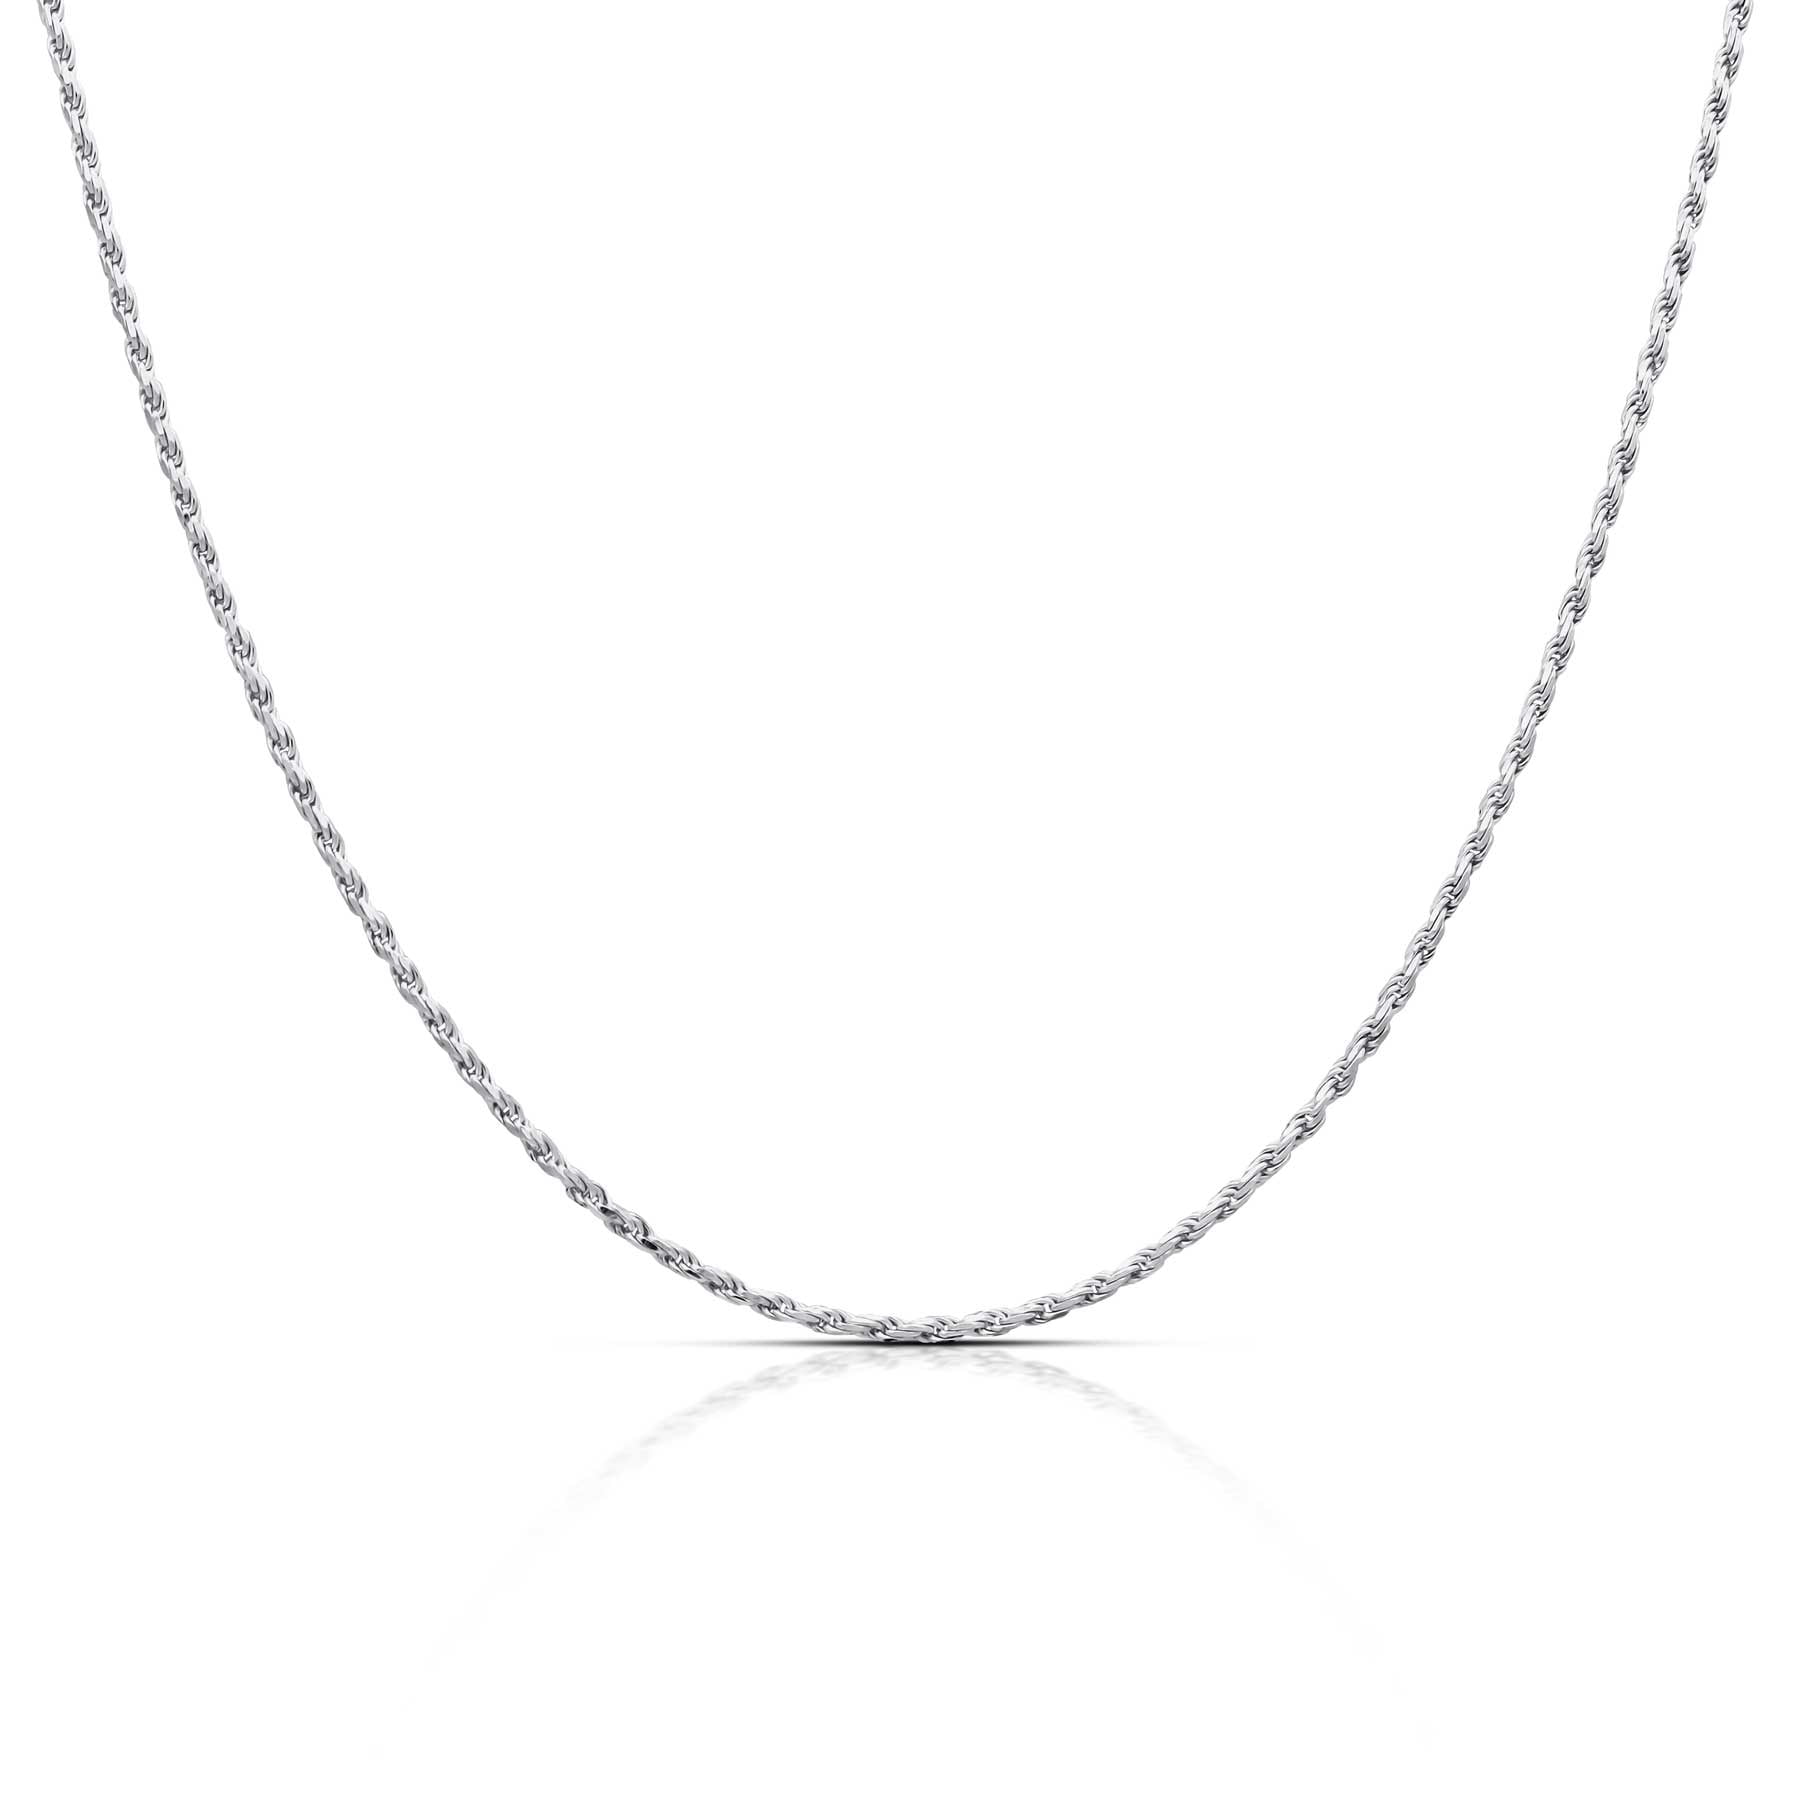 Italian Quality Chain 925 Sterling Silver Chain Anti Tarnish Diamond-Cut Bead Chain Necklaces for Women or Men and Bracelets for Women or Mens Bracelet 